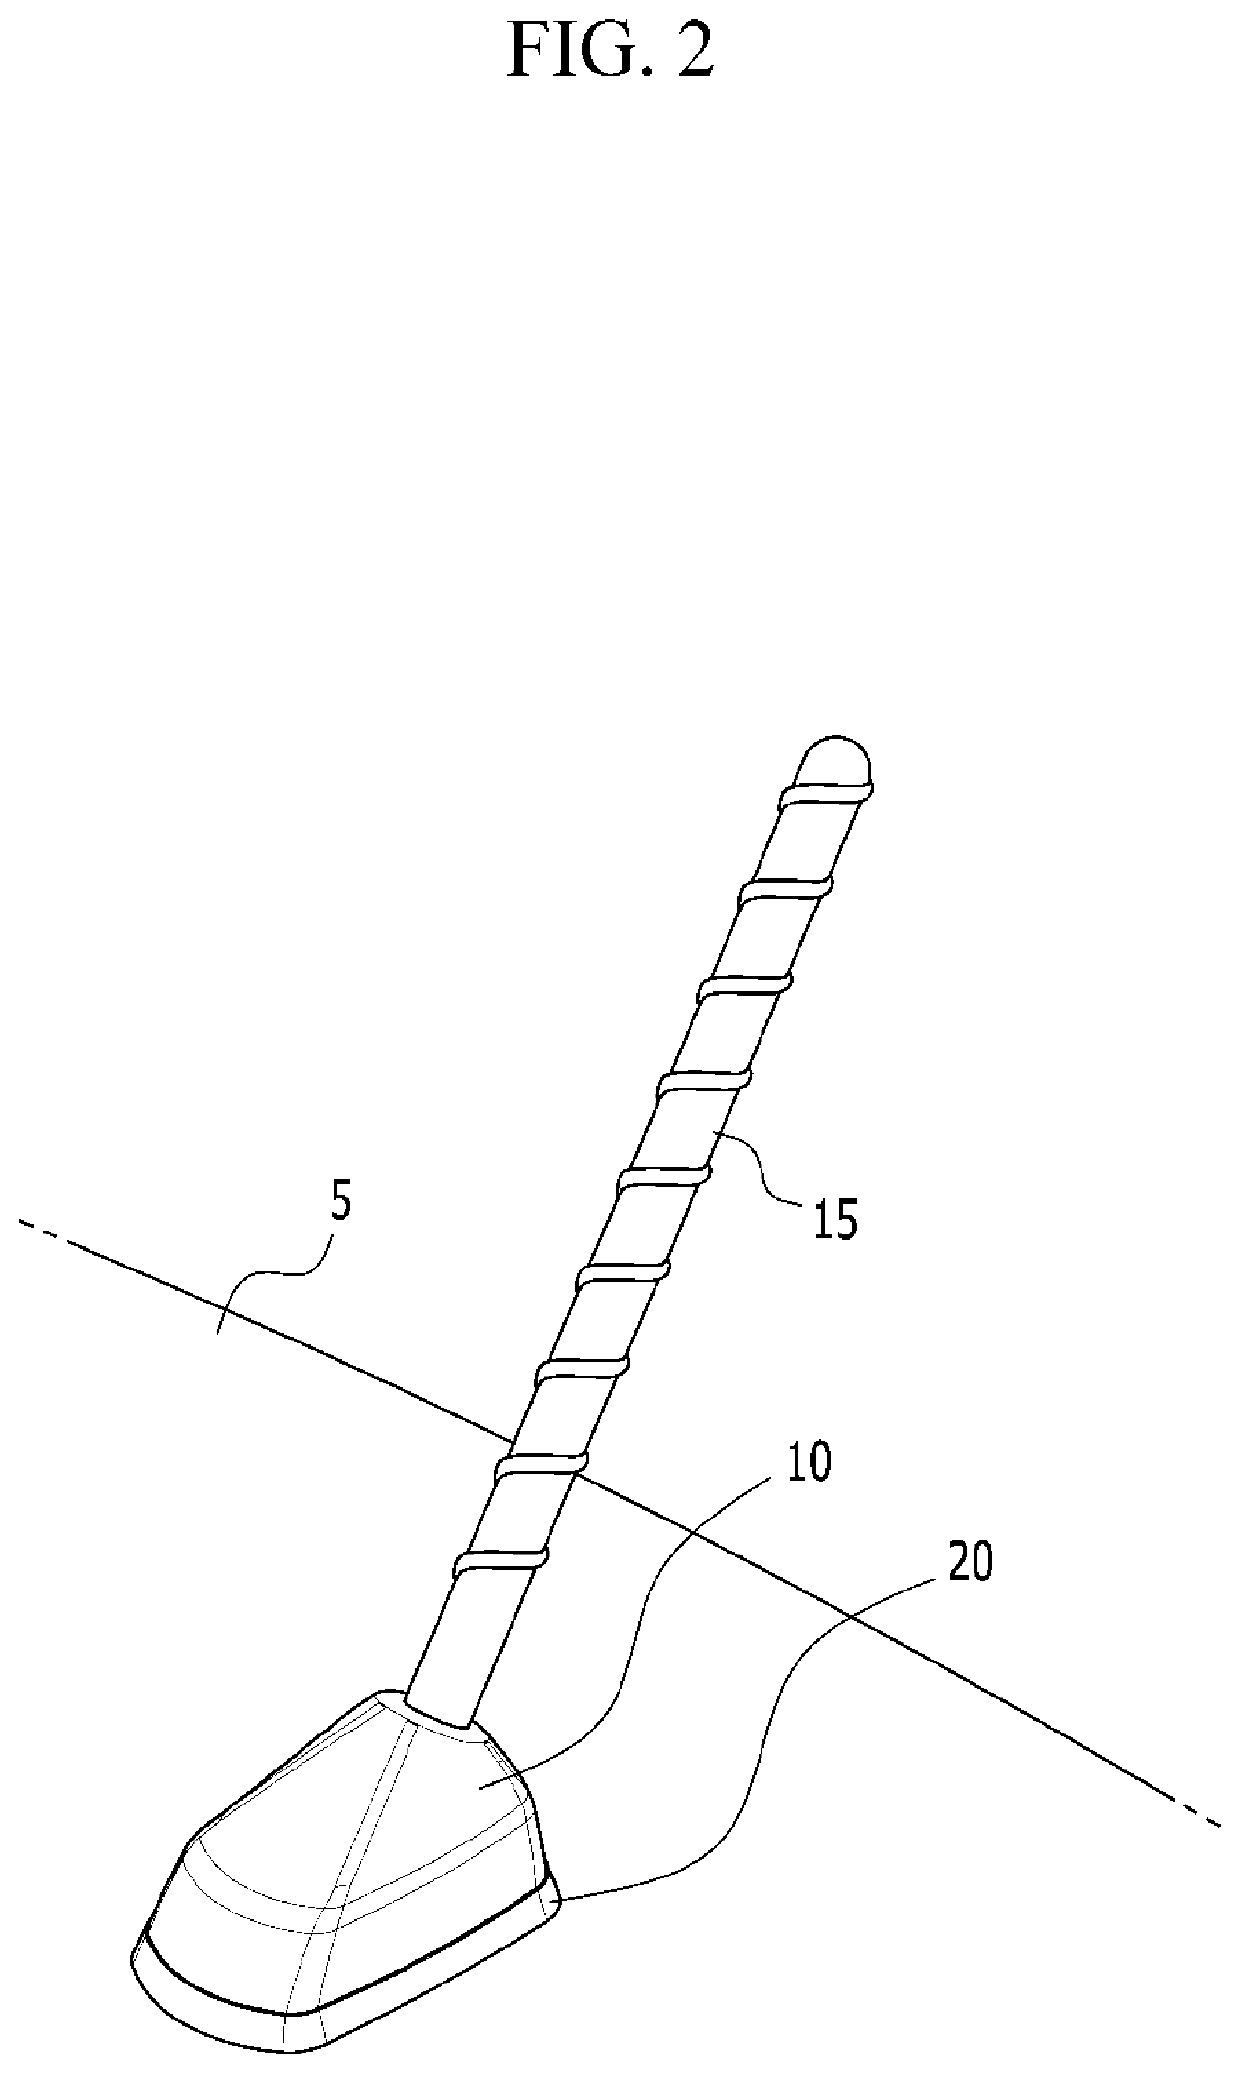 Antenna assembly for vehicle